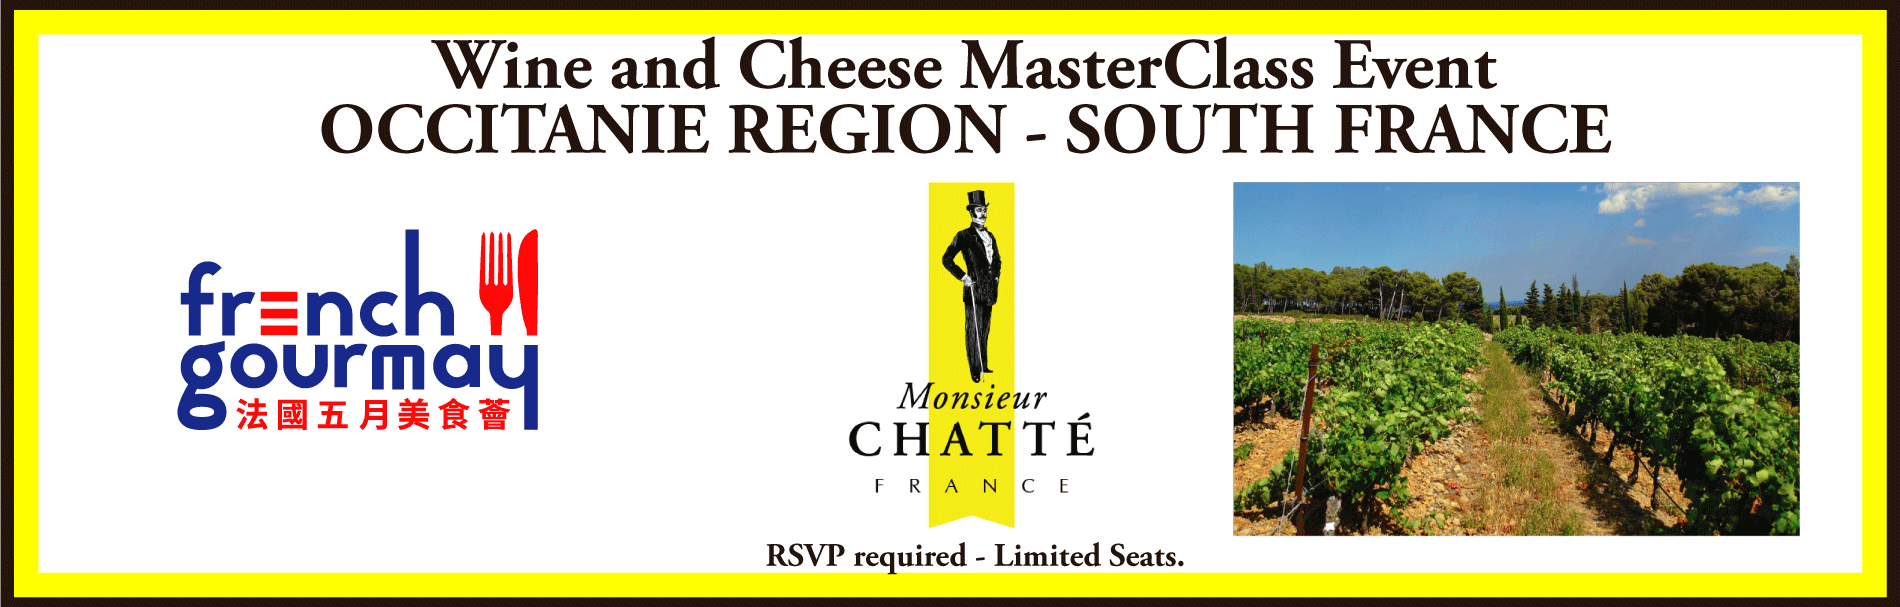 Occitanie MasterClass Wine and Cheese Pairing Event - MAY 7th